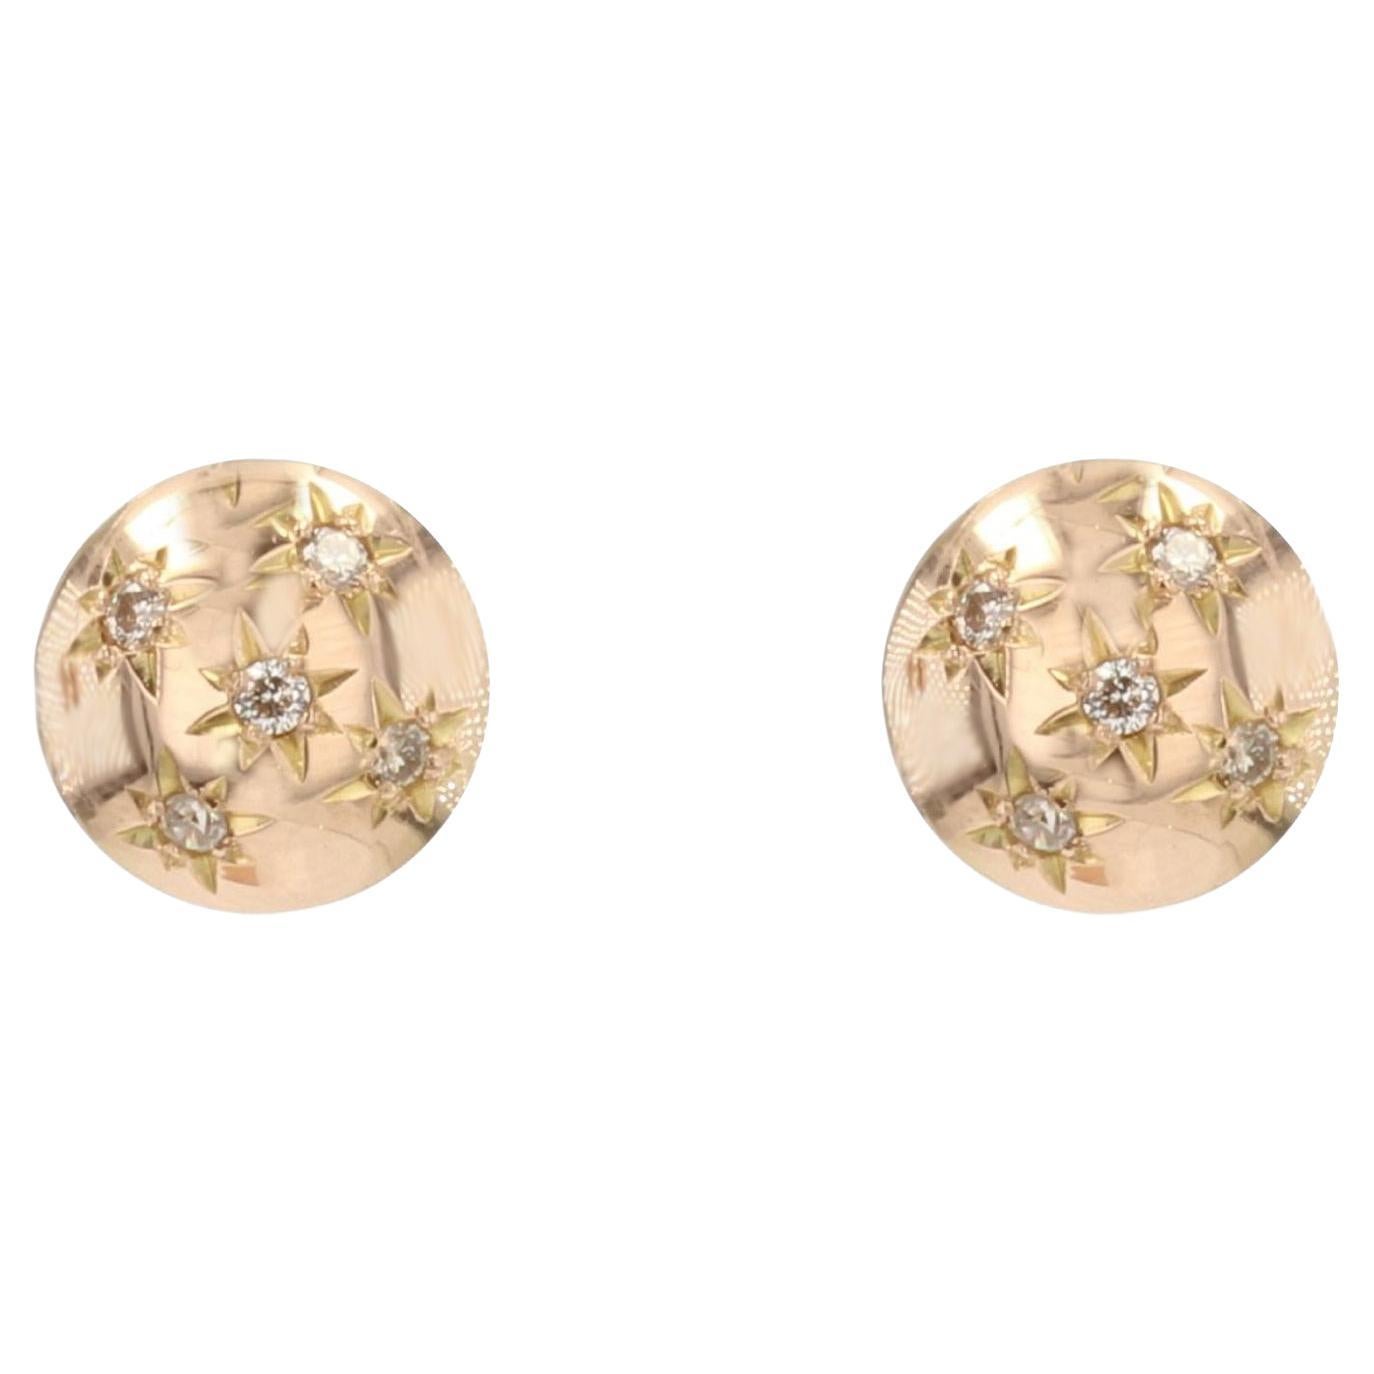 French 1950s Diamonds 18 Karat Yellow Gold Dome Earrings For Sale